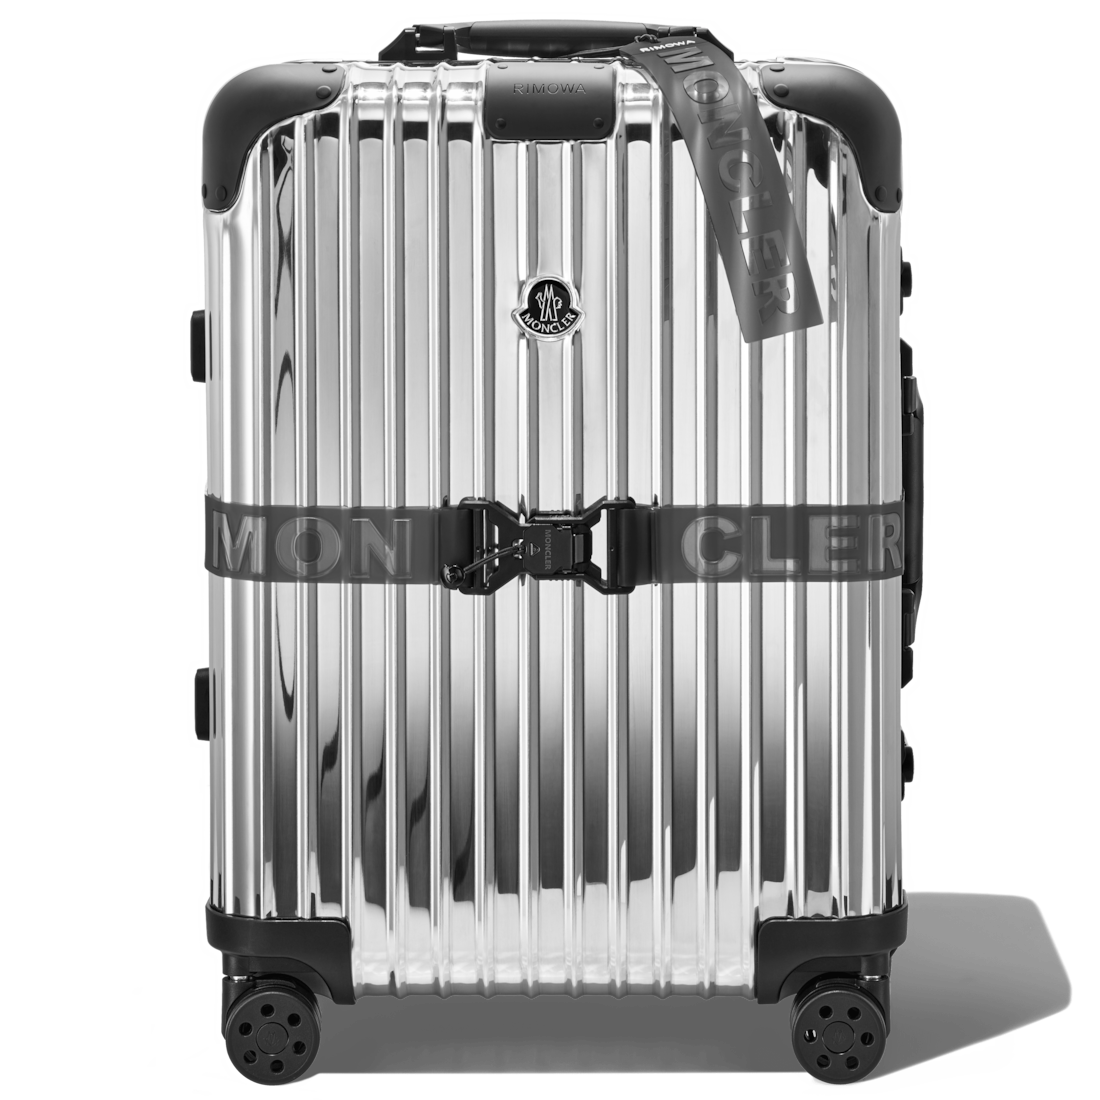 rimowa 22 carry on